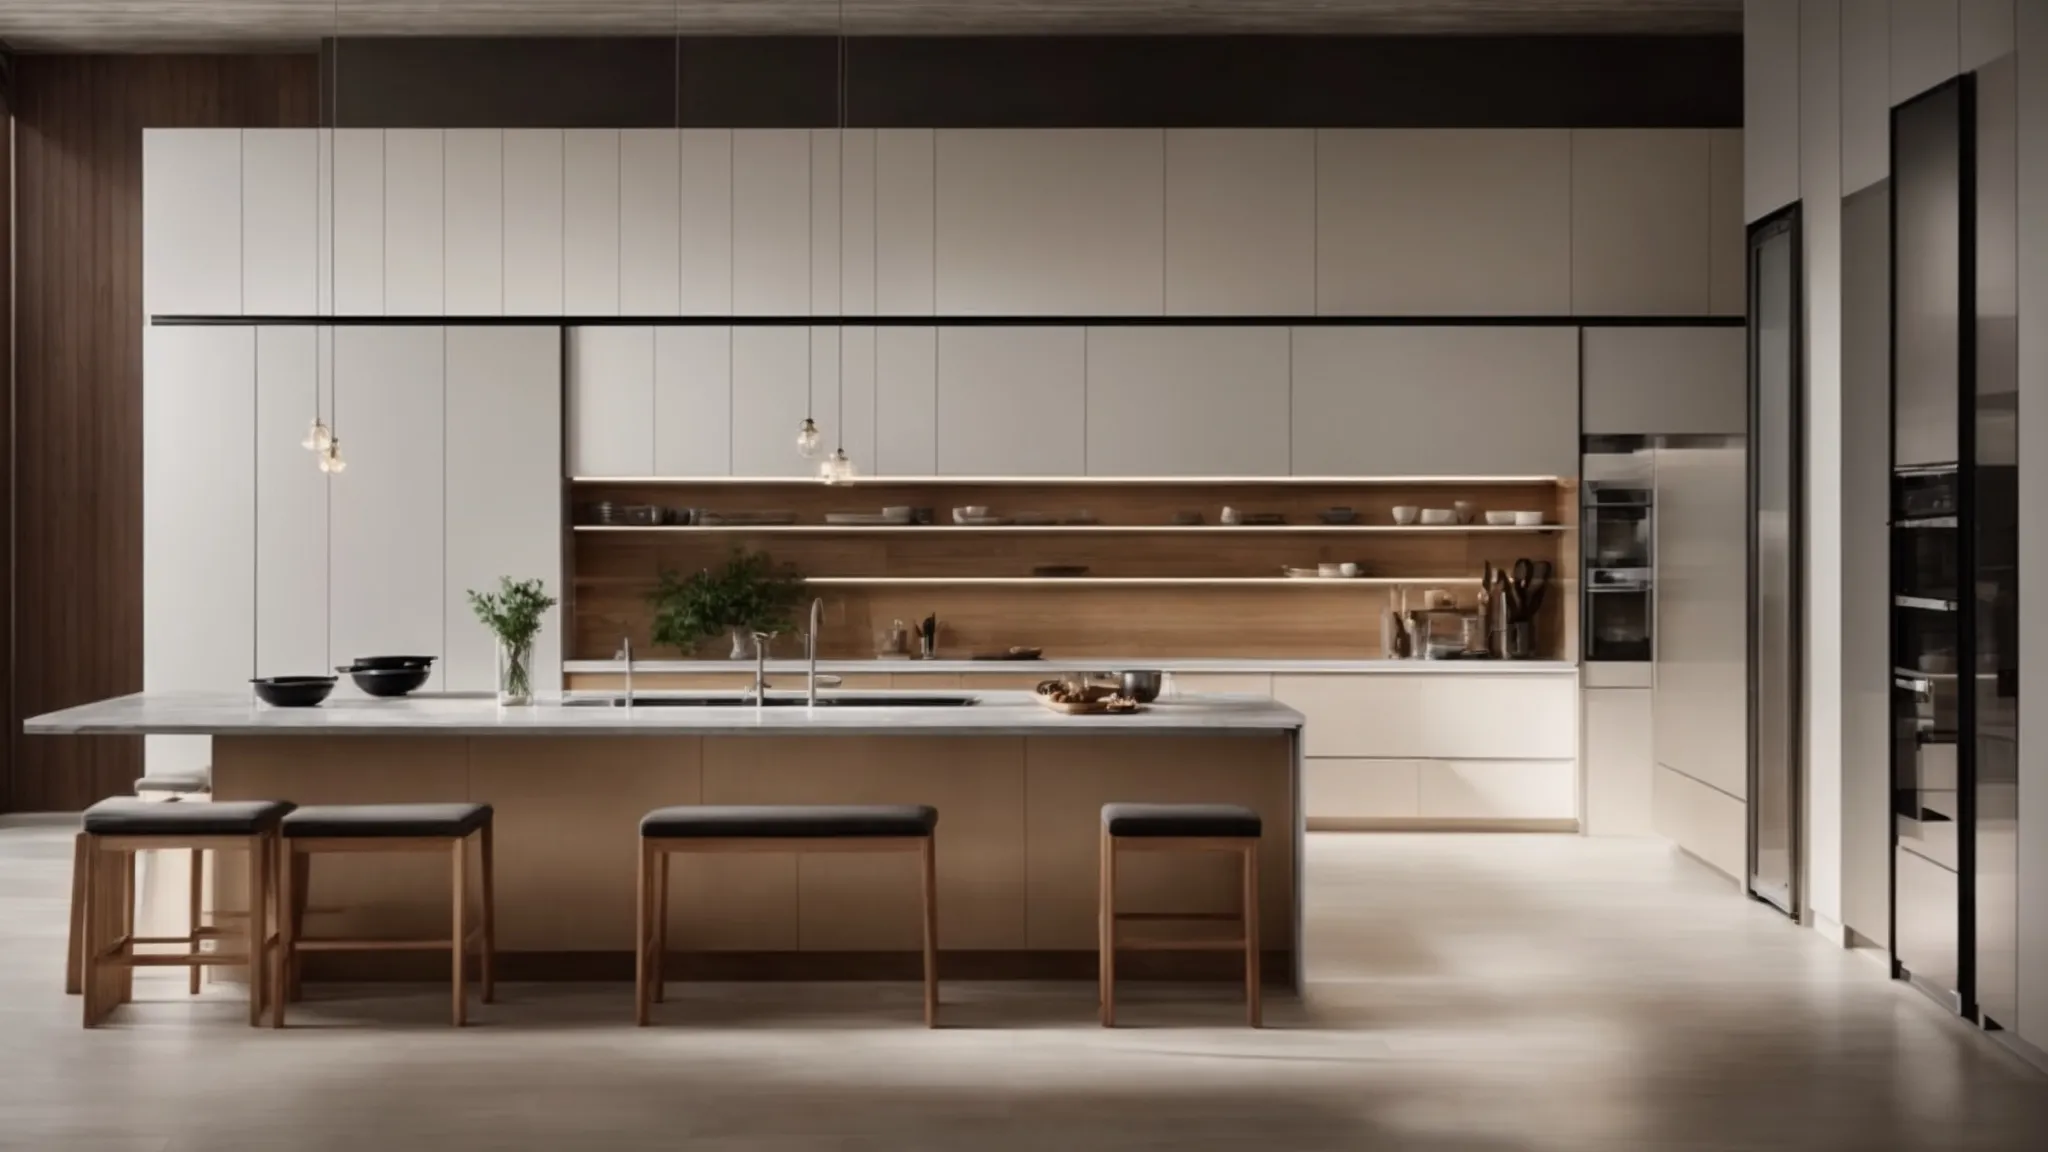 rows of sleek, modern kitchen cabinets displayed in a spacious showroom, illuminating the possibilities for a kitchen transformation.